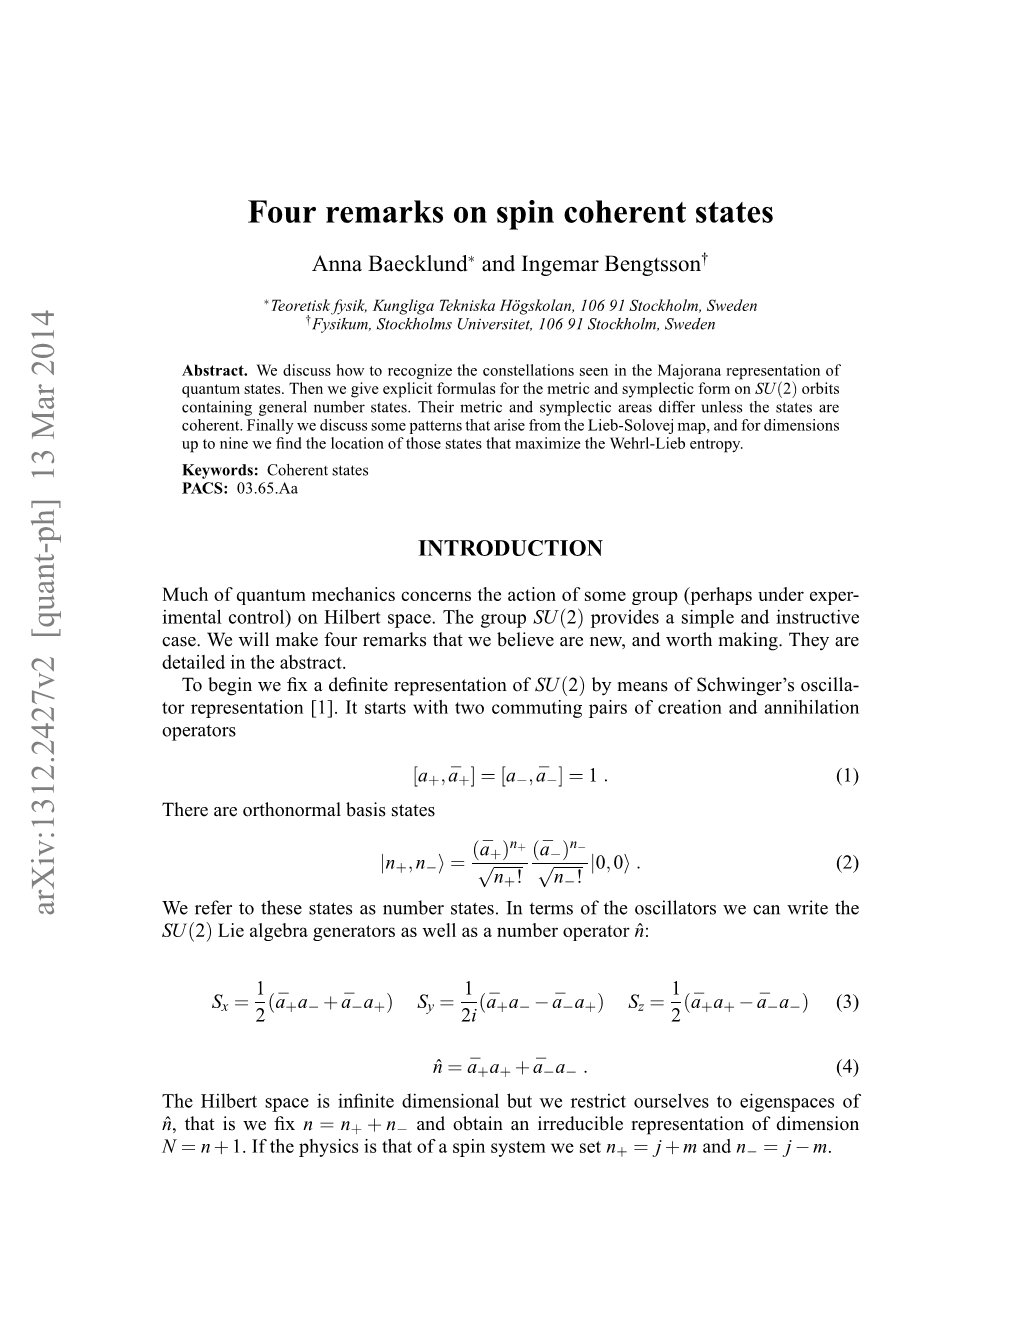 Four Remarks on Spin Coherent States